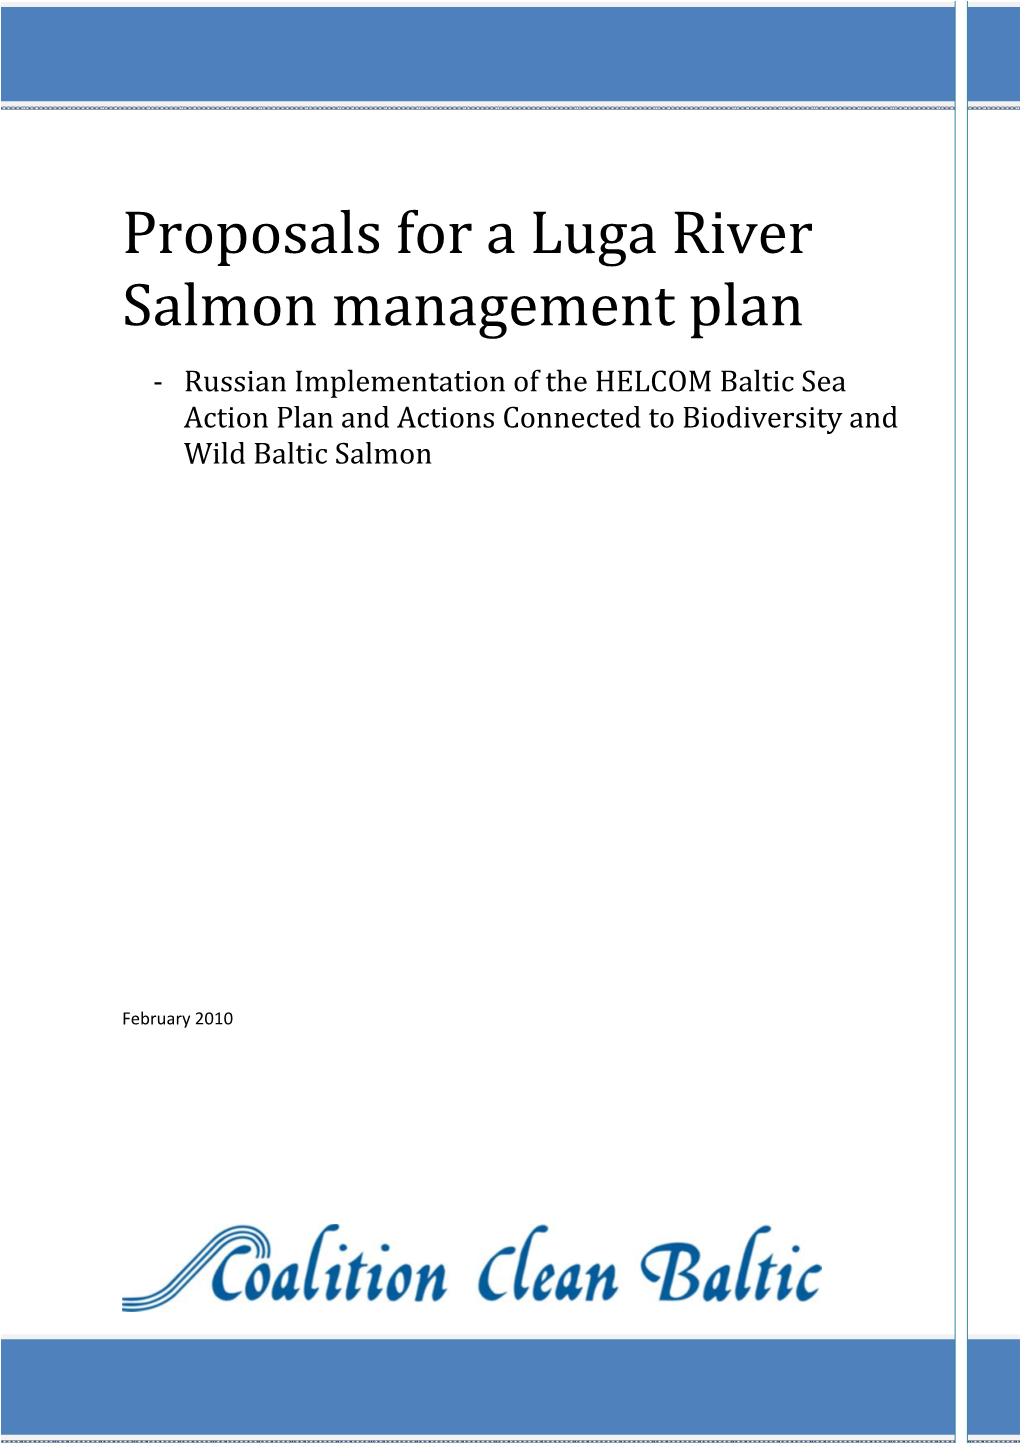 Proposals for a Luga River Salmon Management Plan